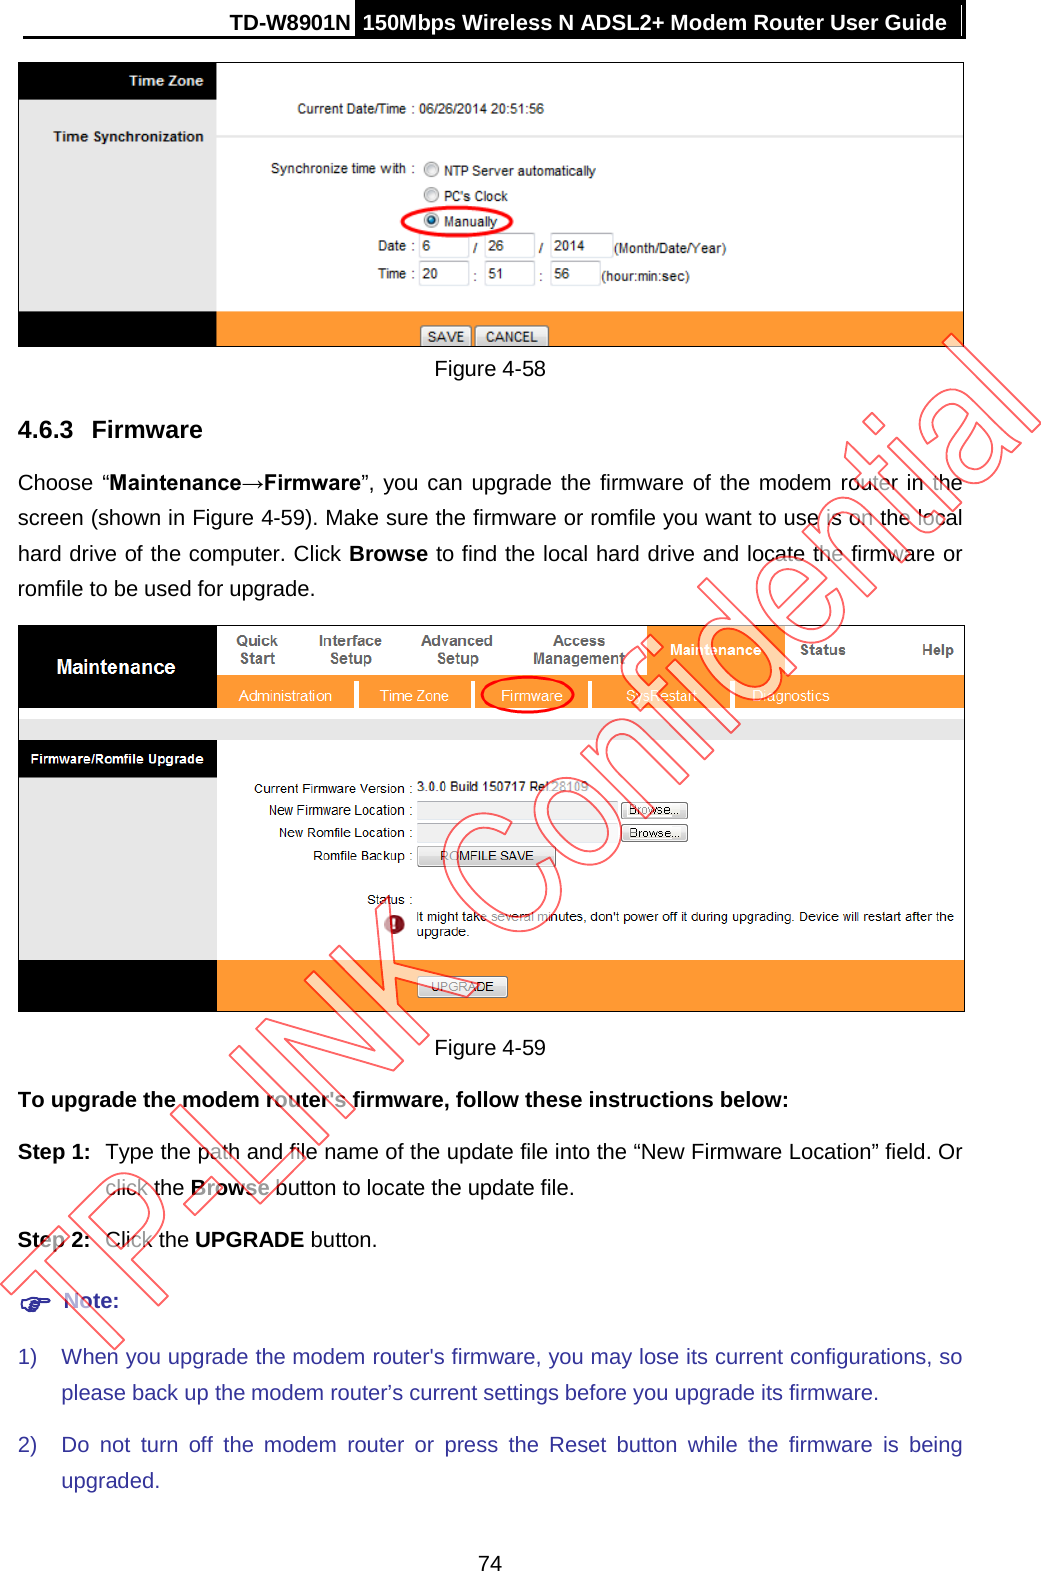 TD-W8901N 150Mbps Wireless N ADSL2+ Modem Router User Guide   Figure 4-58 4.6.3 Firmware Choose “Maintenance→Firmware”, you can upgrade the firmware of the modem router in the screen (shown in Figure 4-59). Make sure the firmware or romfile you want to use is on the local hard drive of the computer. Click Browse to find the local hard drive and locate the firmware or romfile to be used for upgrade.  Figure 4-59 To upgrade the modem router&apos;s firmware, follow these instructions below: Step 1: Type the path and file name of the update file into the “New Firmware Location” field. Or click the Browse button to locate the update file. Step 2: Click the UPGRADE button.  Note: 1) When you upgrade the modem router&apos;s firmware, you may lose its current configurations, so please back up the modem router’s current settings before you upgrade its firmware. 2) Do not turn off the modem router or press the Reset button while the firmware is being upgraded. 74 